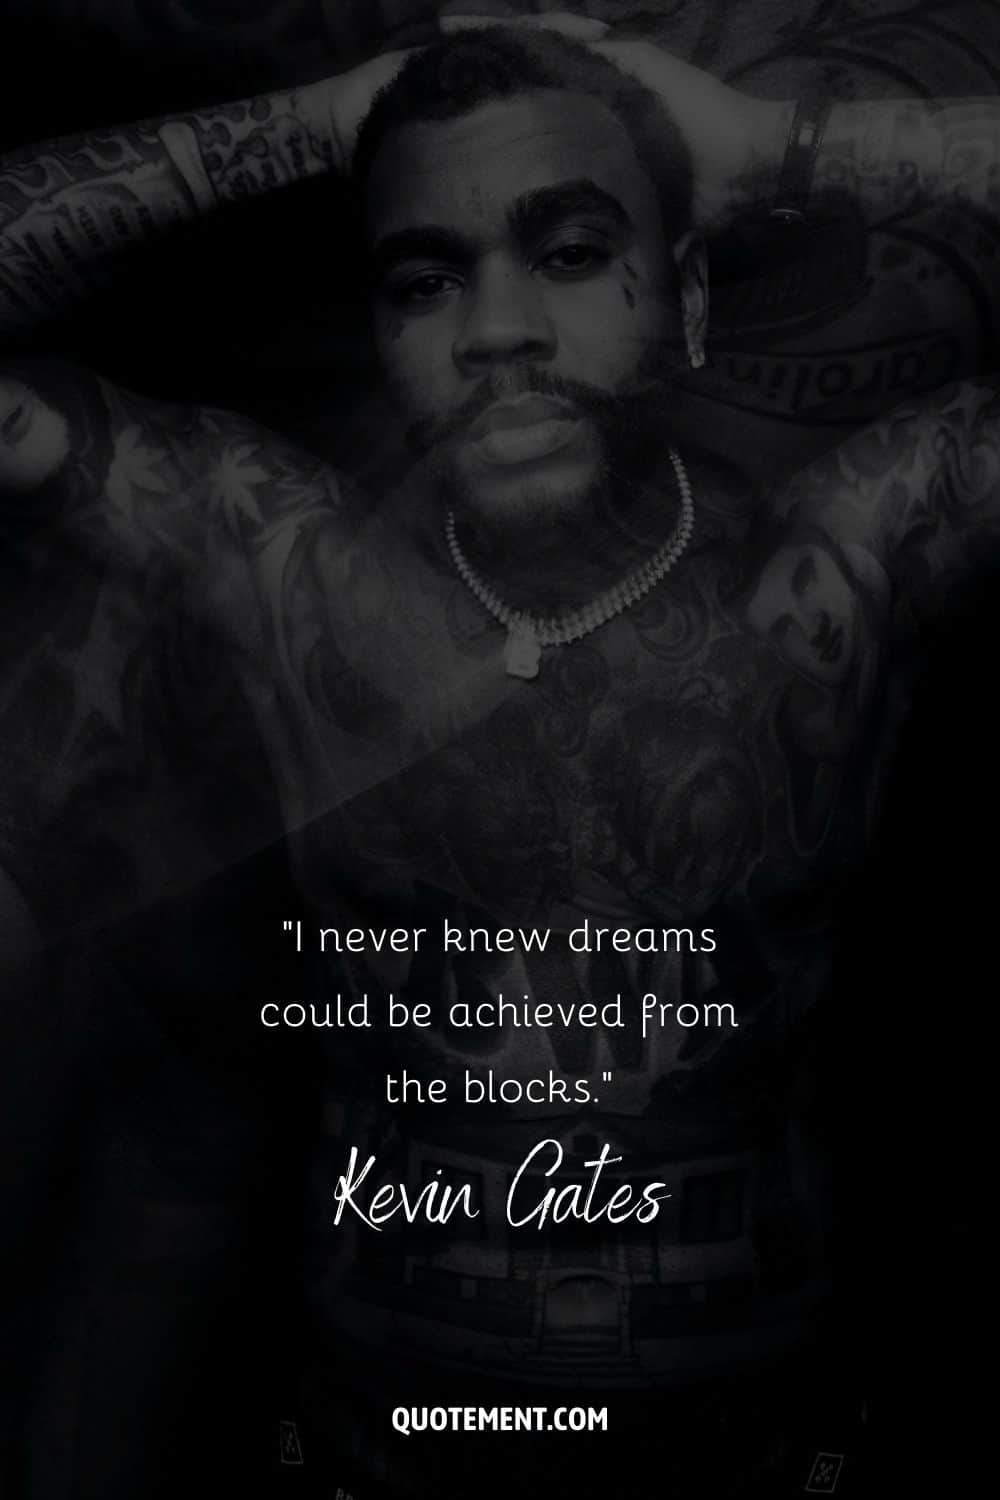 “I never knew dreams could be achieved from the blocks.” – Kevin Gates